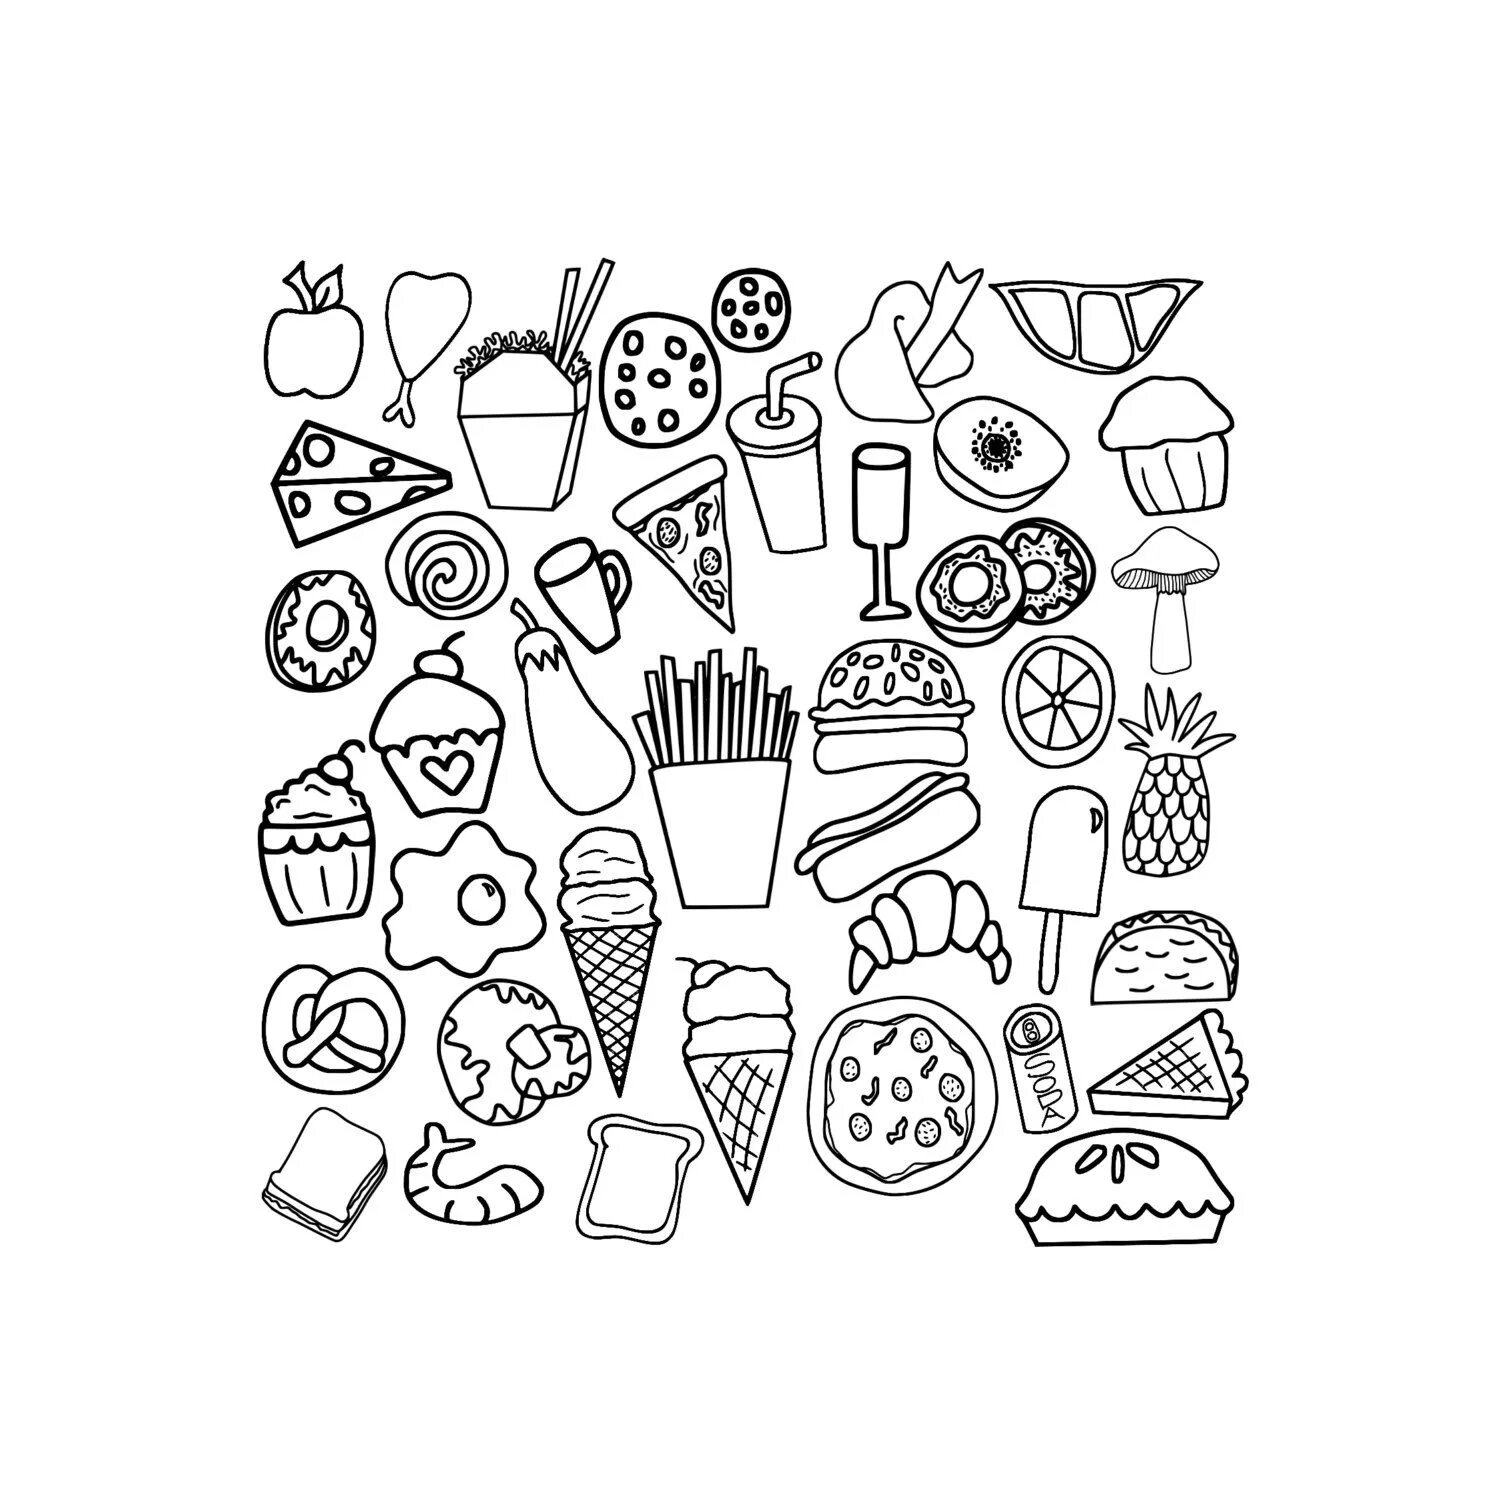 Coloring page of stylish food stickers